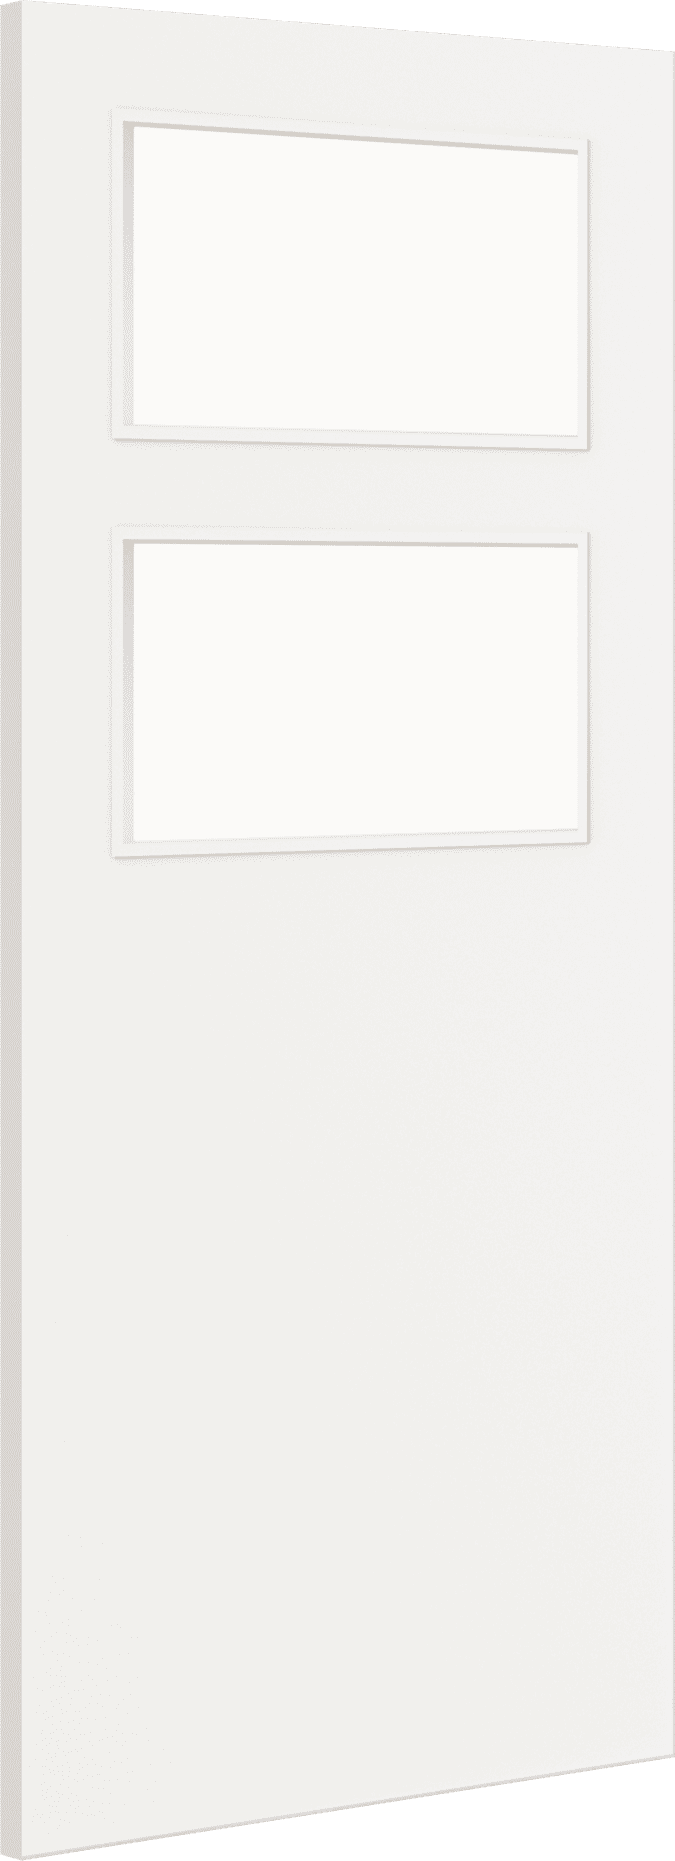 1981mm x 838mm x 44mm (33") Architectural Paint Grade White 02 Clear Glazed Fire Door Blank